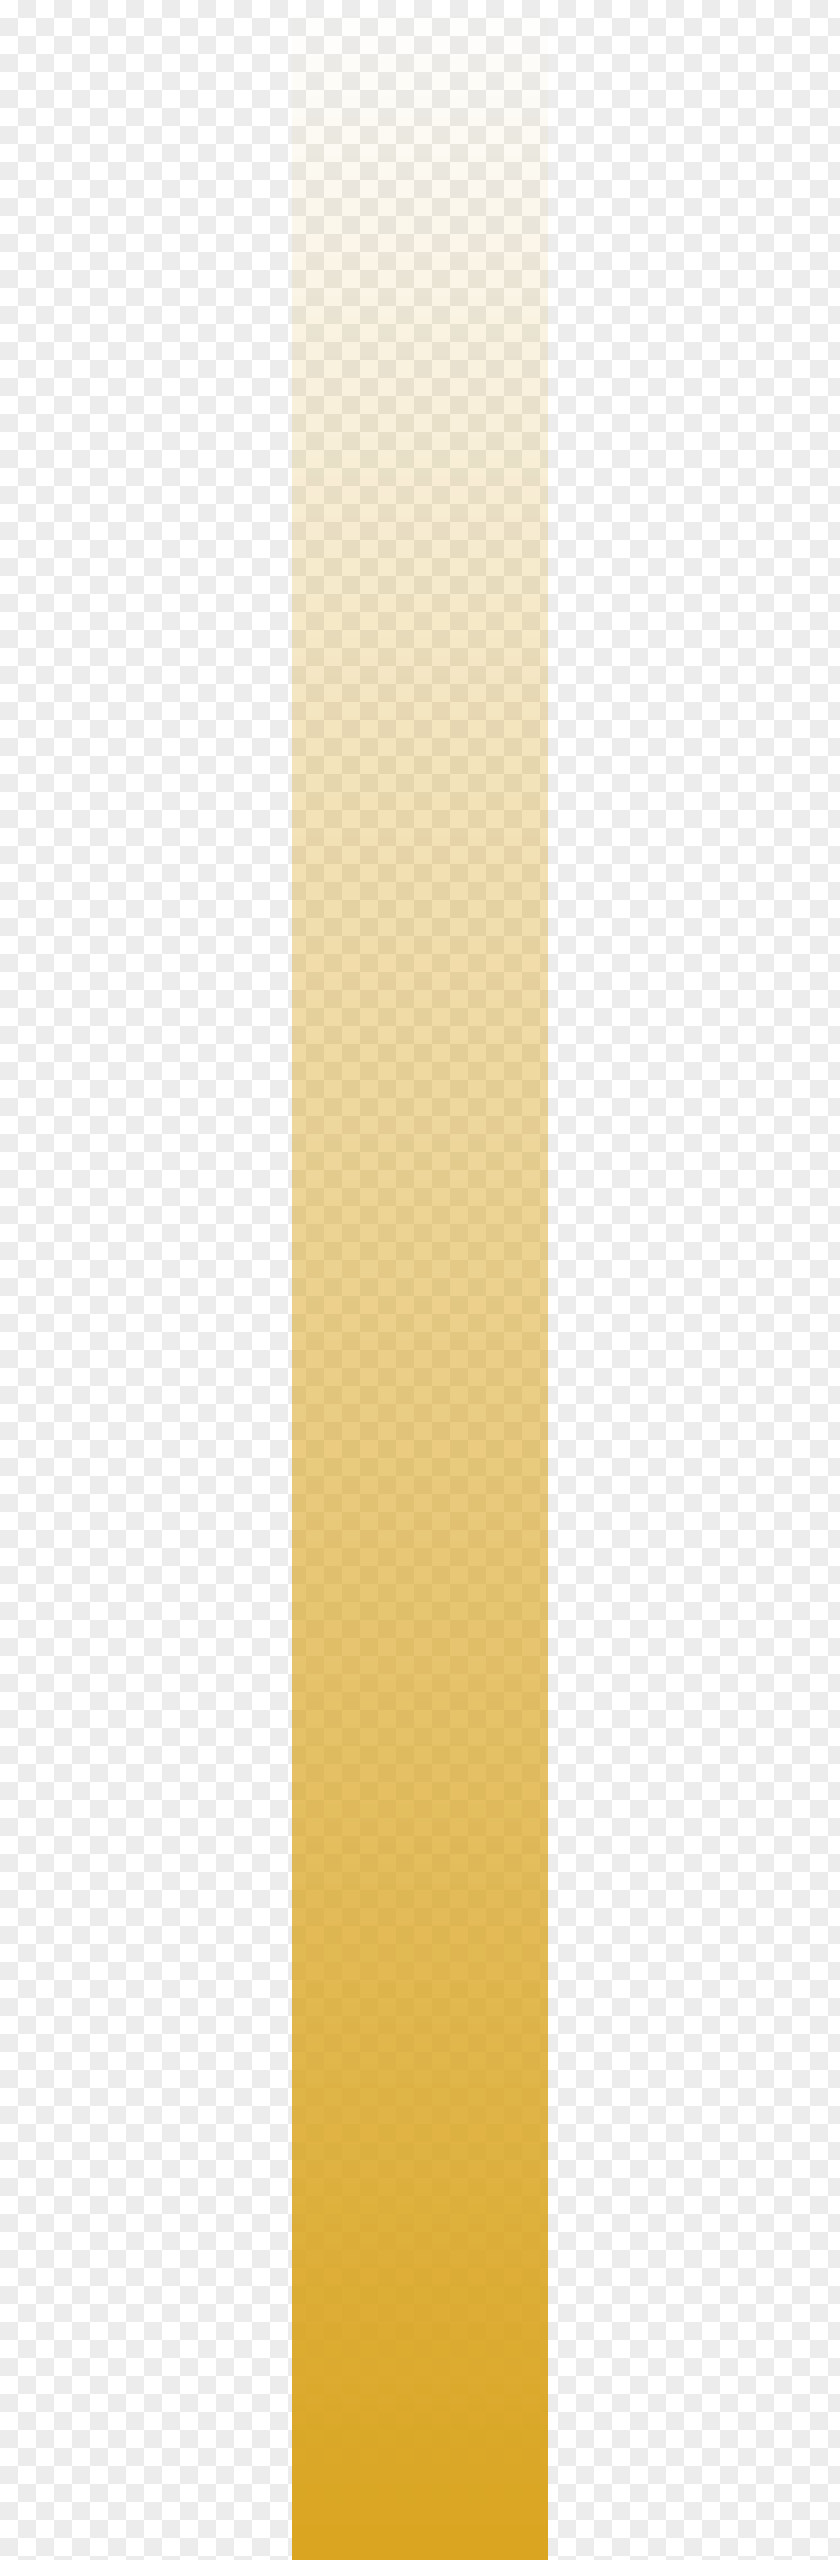 Goldenrod Cliparts Yellow Angle Pattern PNG